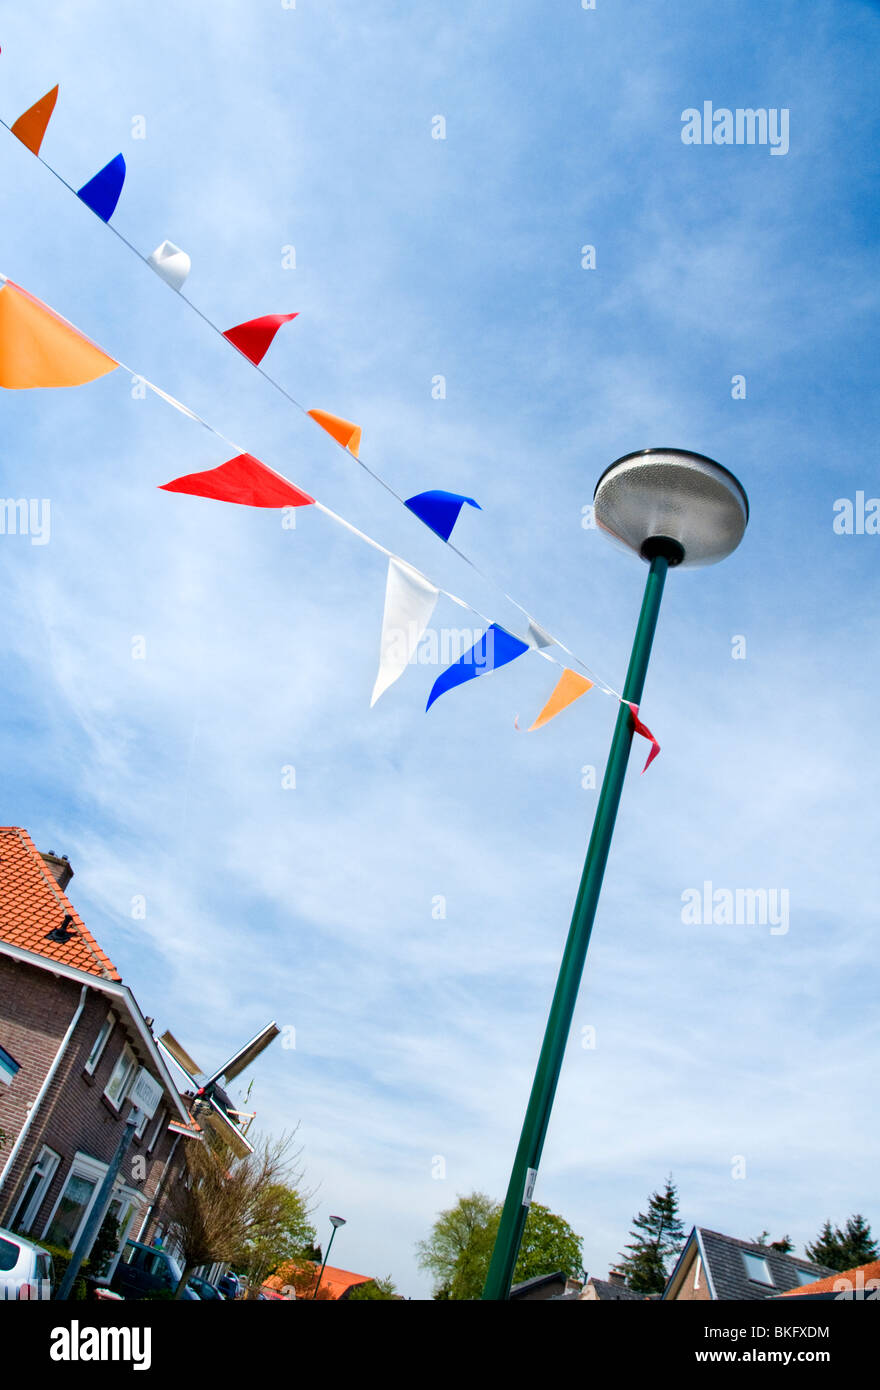 A street in the Dutch town of Veenendaal decorated with bunting in celebration of  the King's Day holiday on April 27 Stock Photo